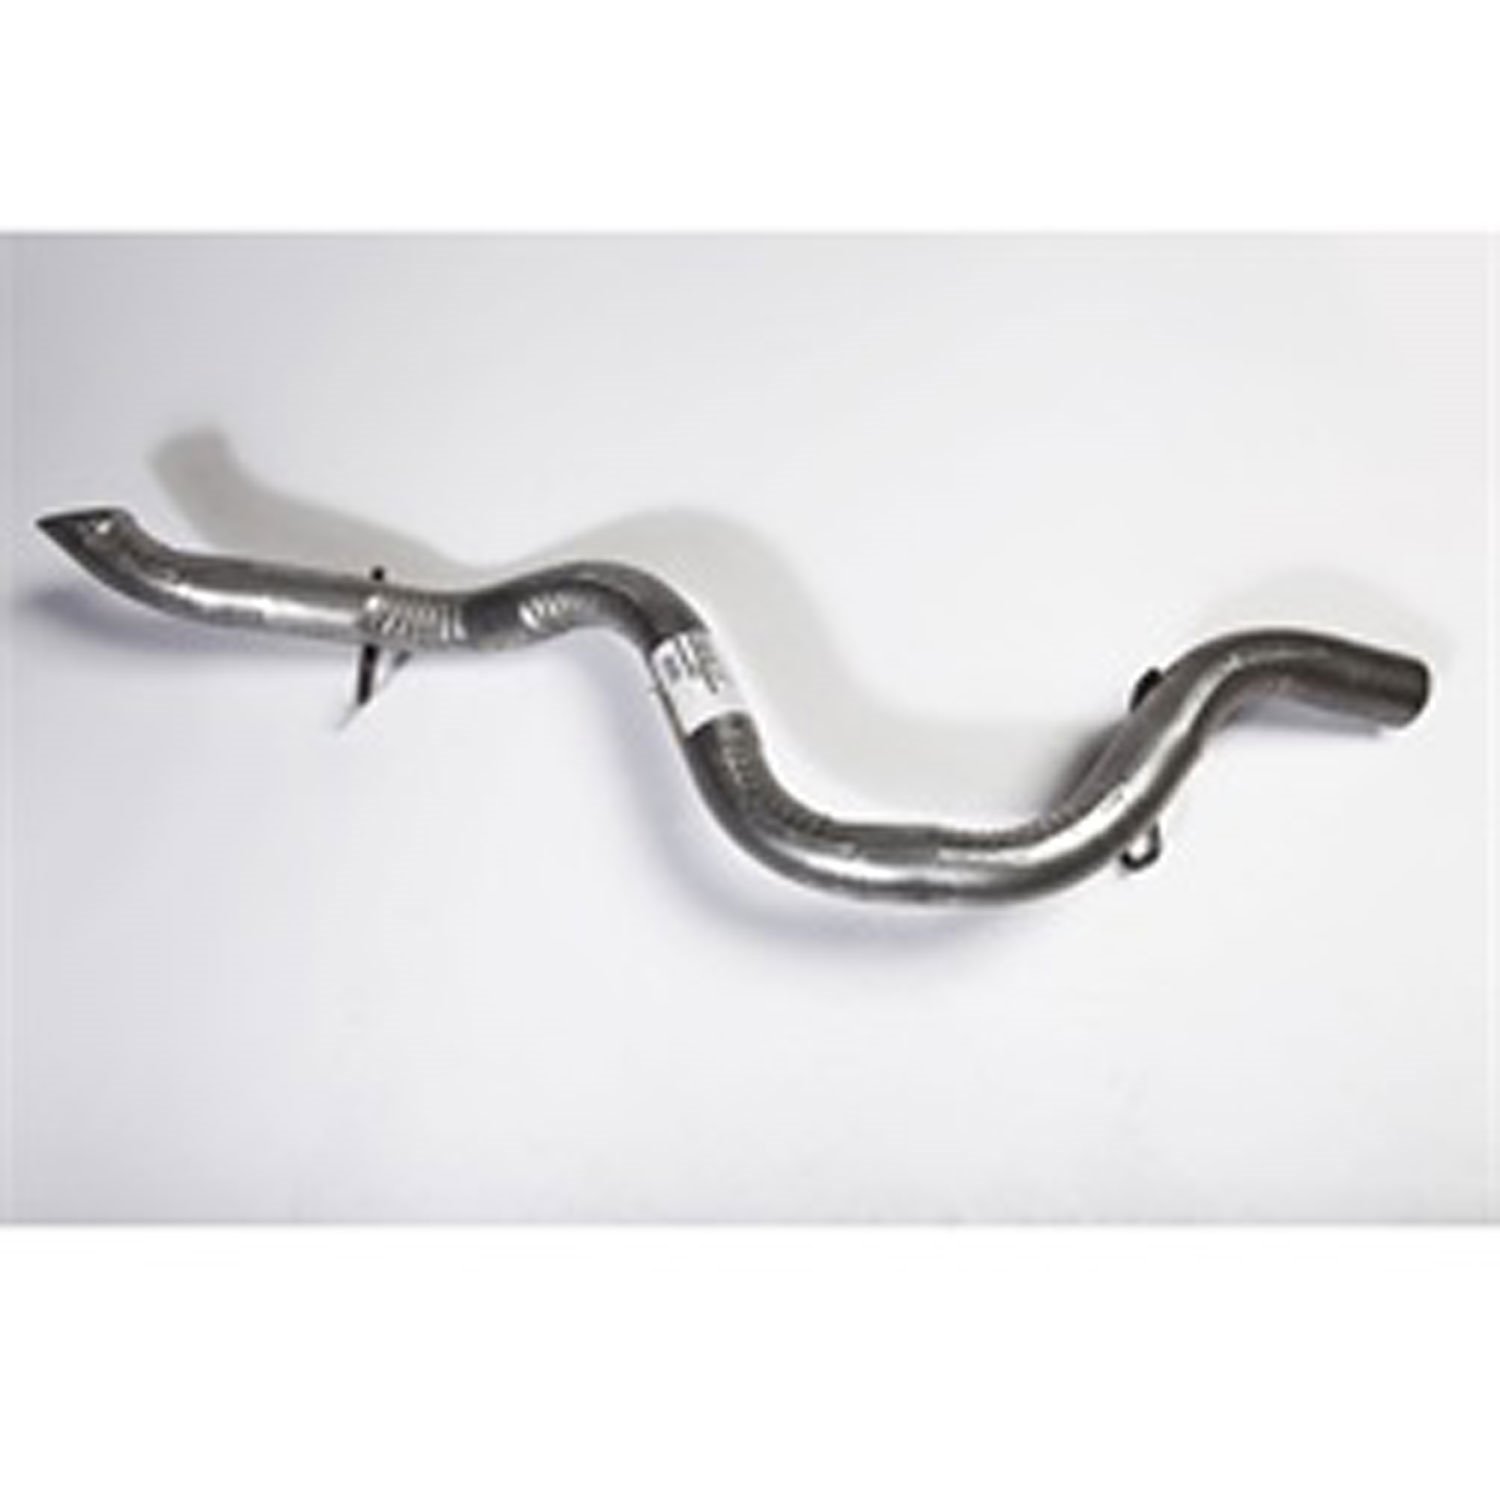 Replacement tailpipe from Omix-ADA, Fits 97-00 Jeep Wrangler TJ with a 2.5 liter or 4.0 liter engine.